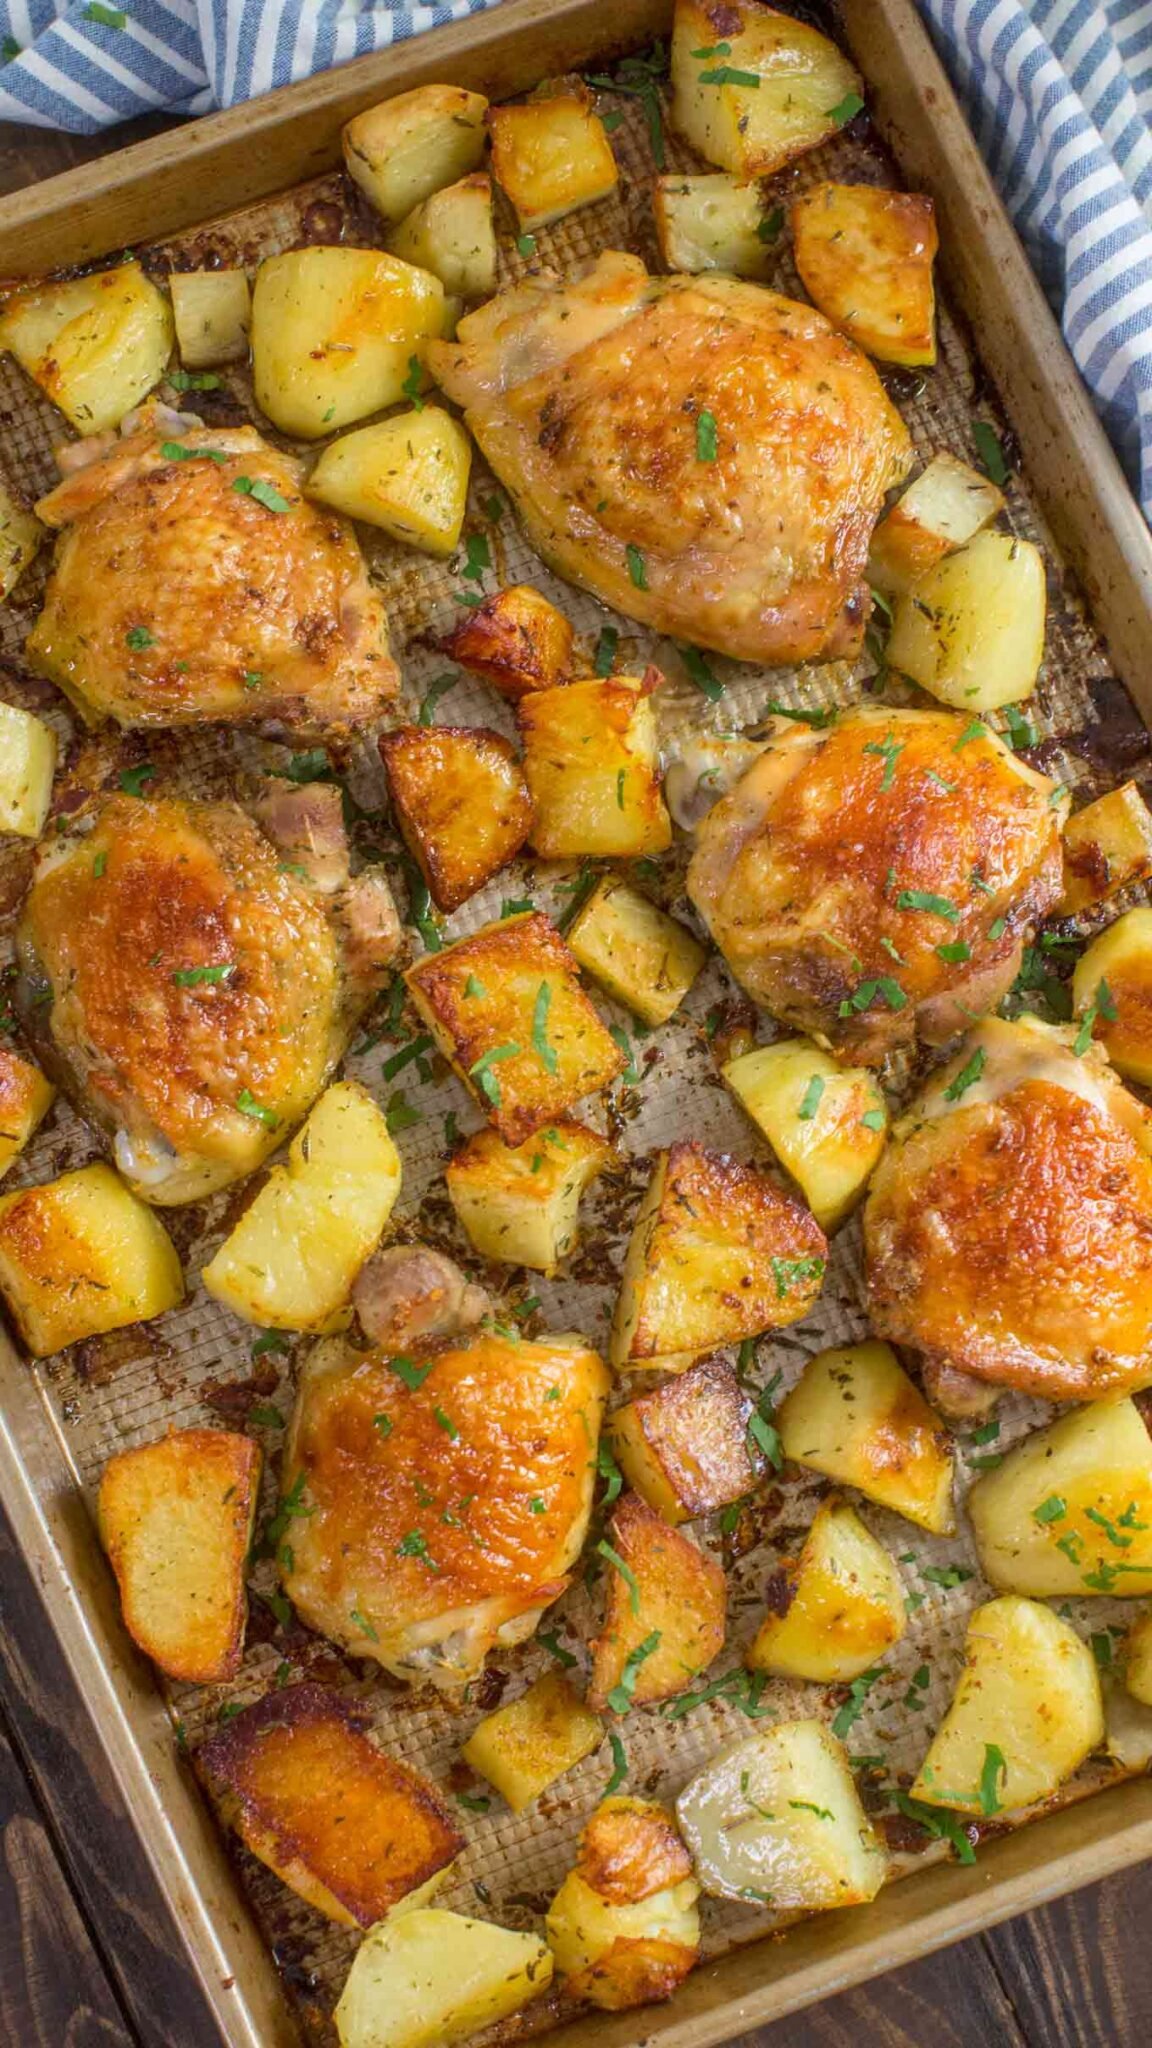 Chicken and Potatoes Recipe - 5 Ingredients Only! - S&SM